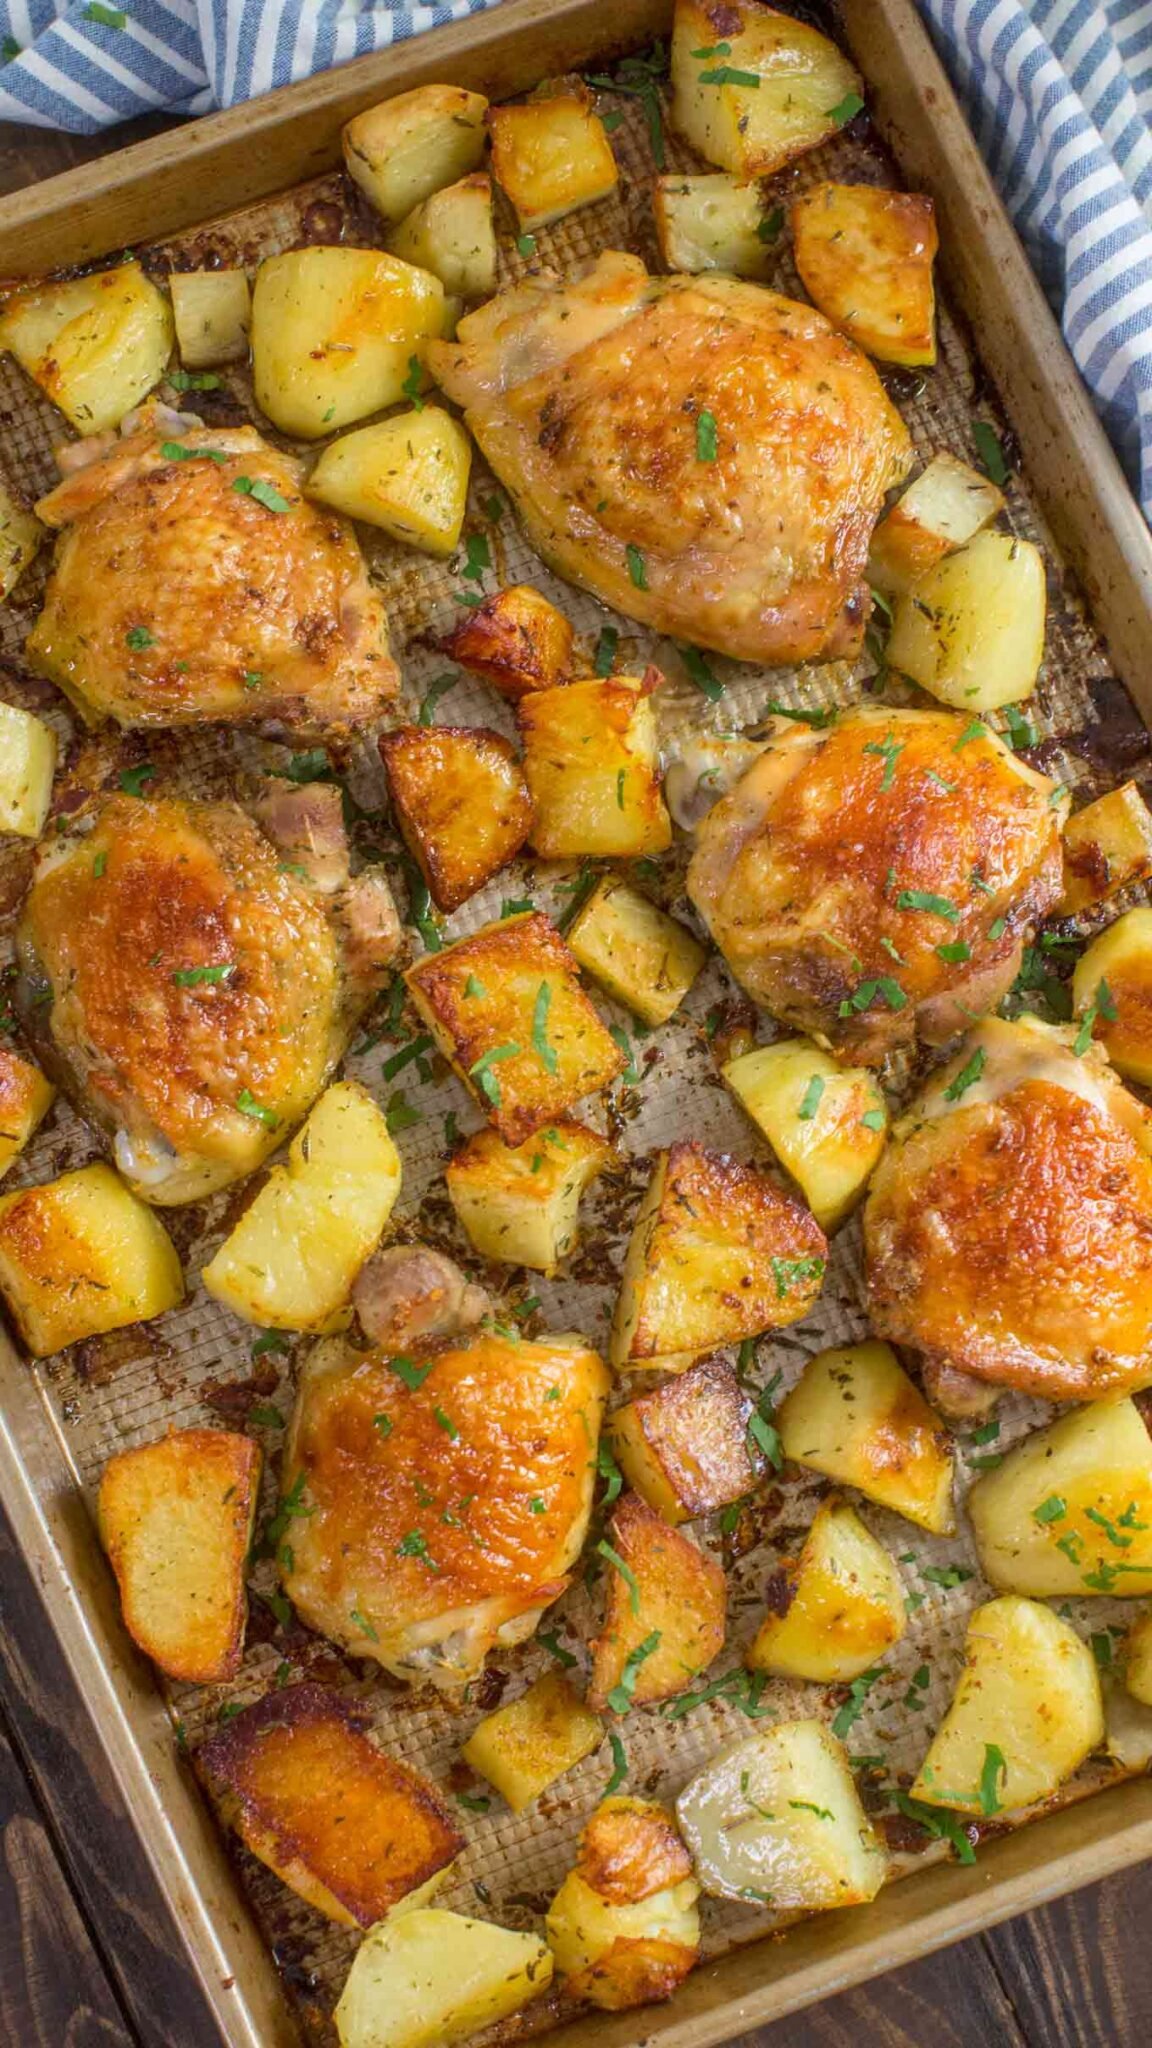 Chicken and Potatoes Recipe - 5 Ingredients Only! - S&SM